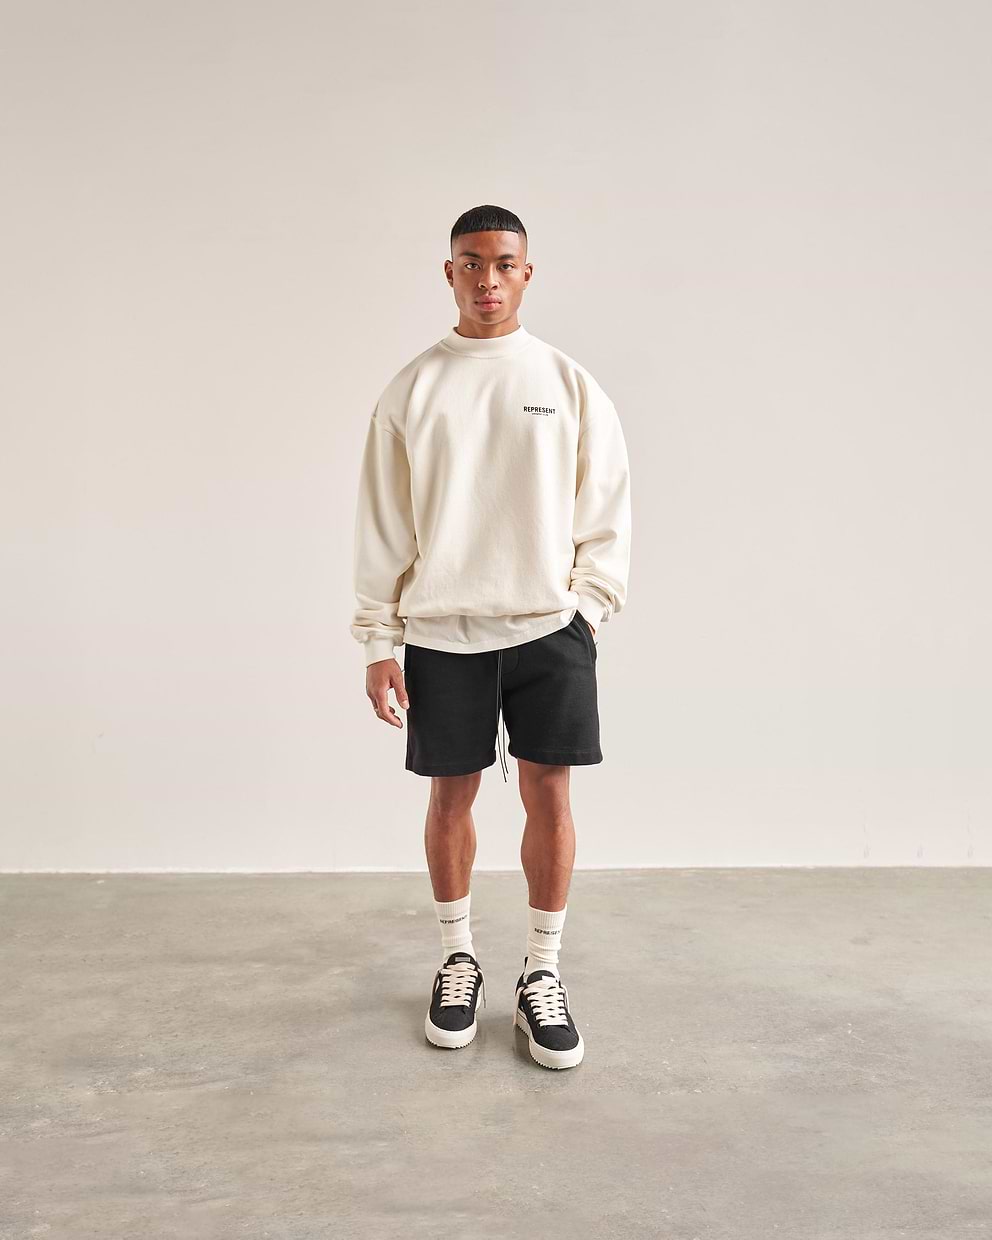 Represent Owners Club Sweater - Flat White